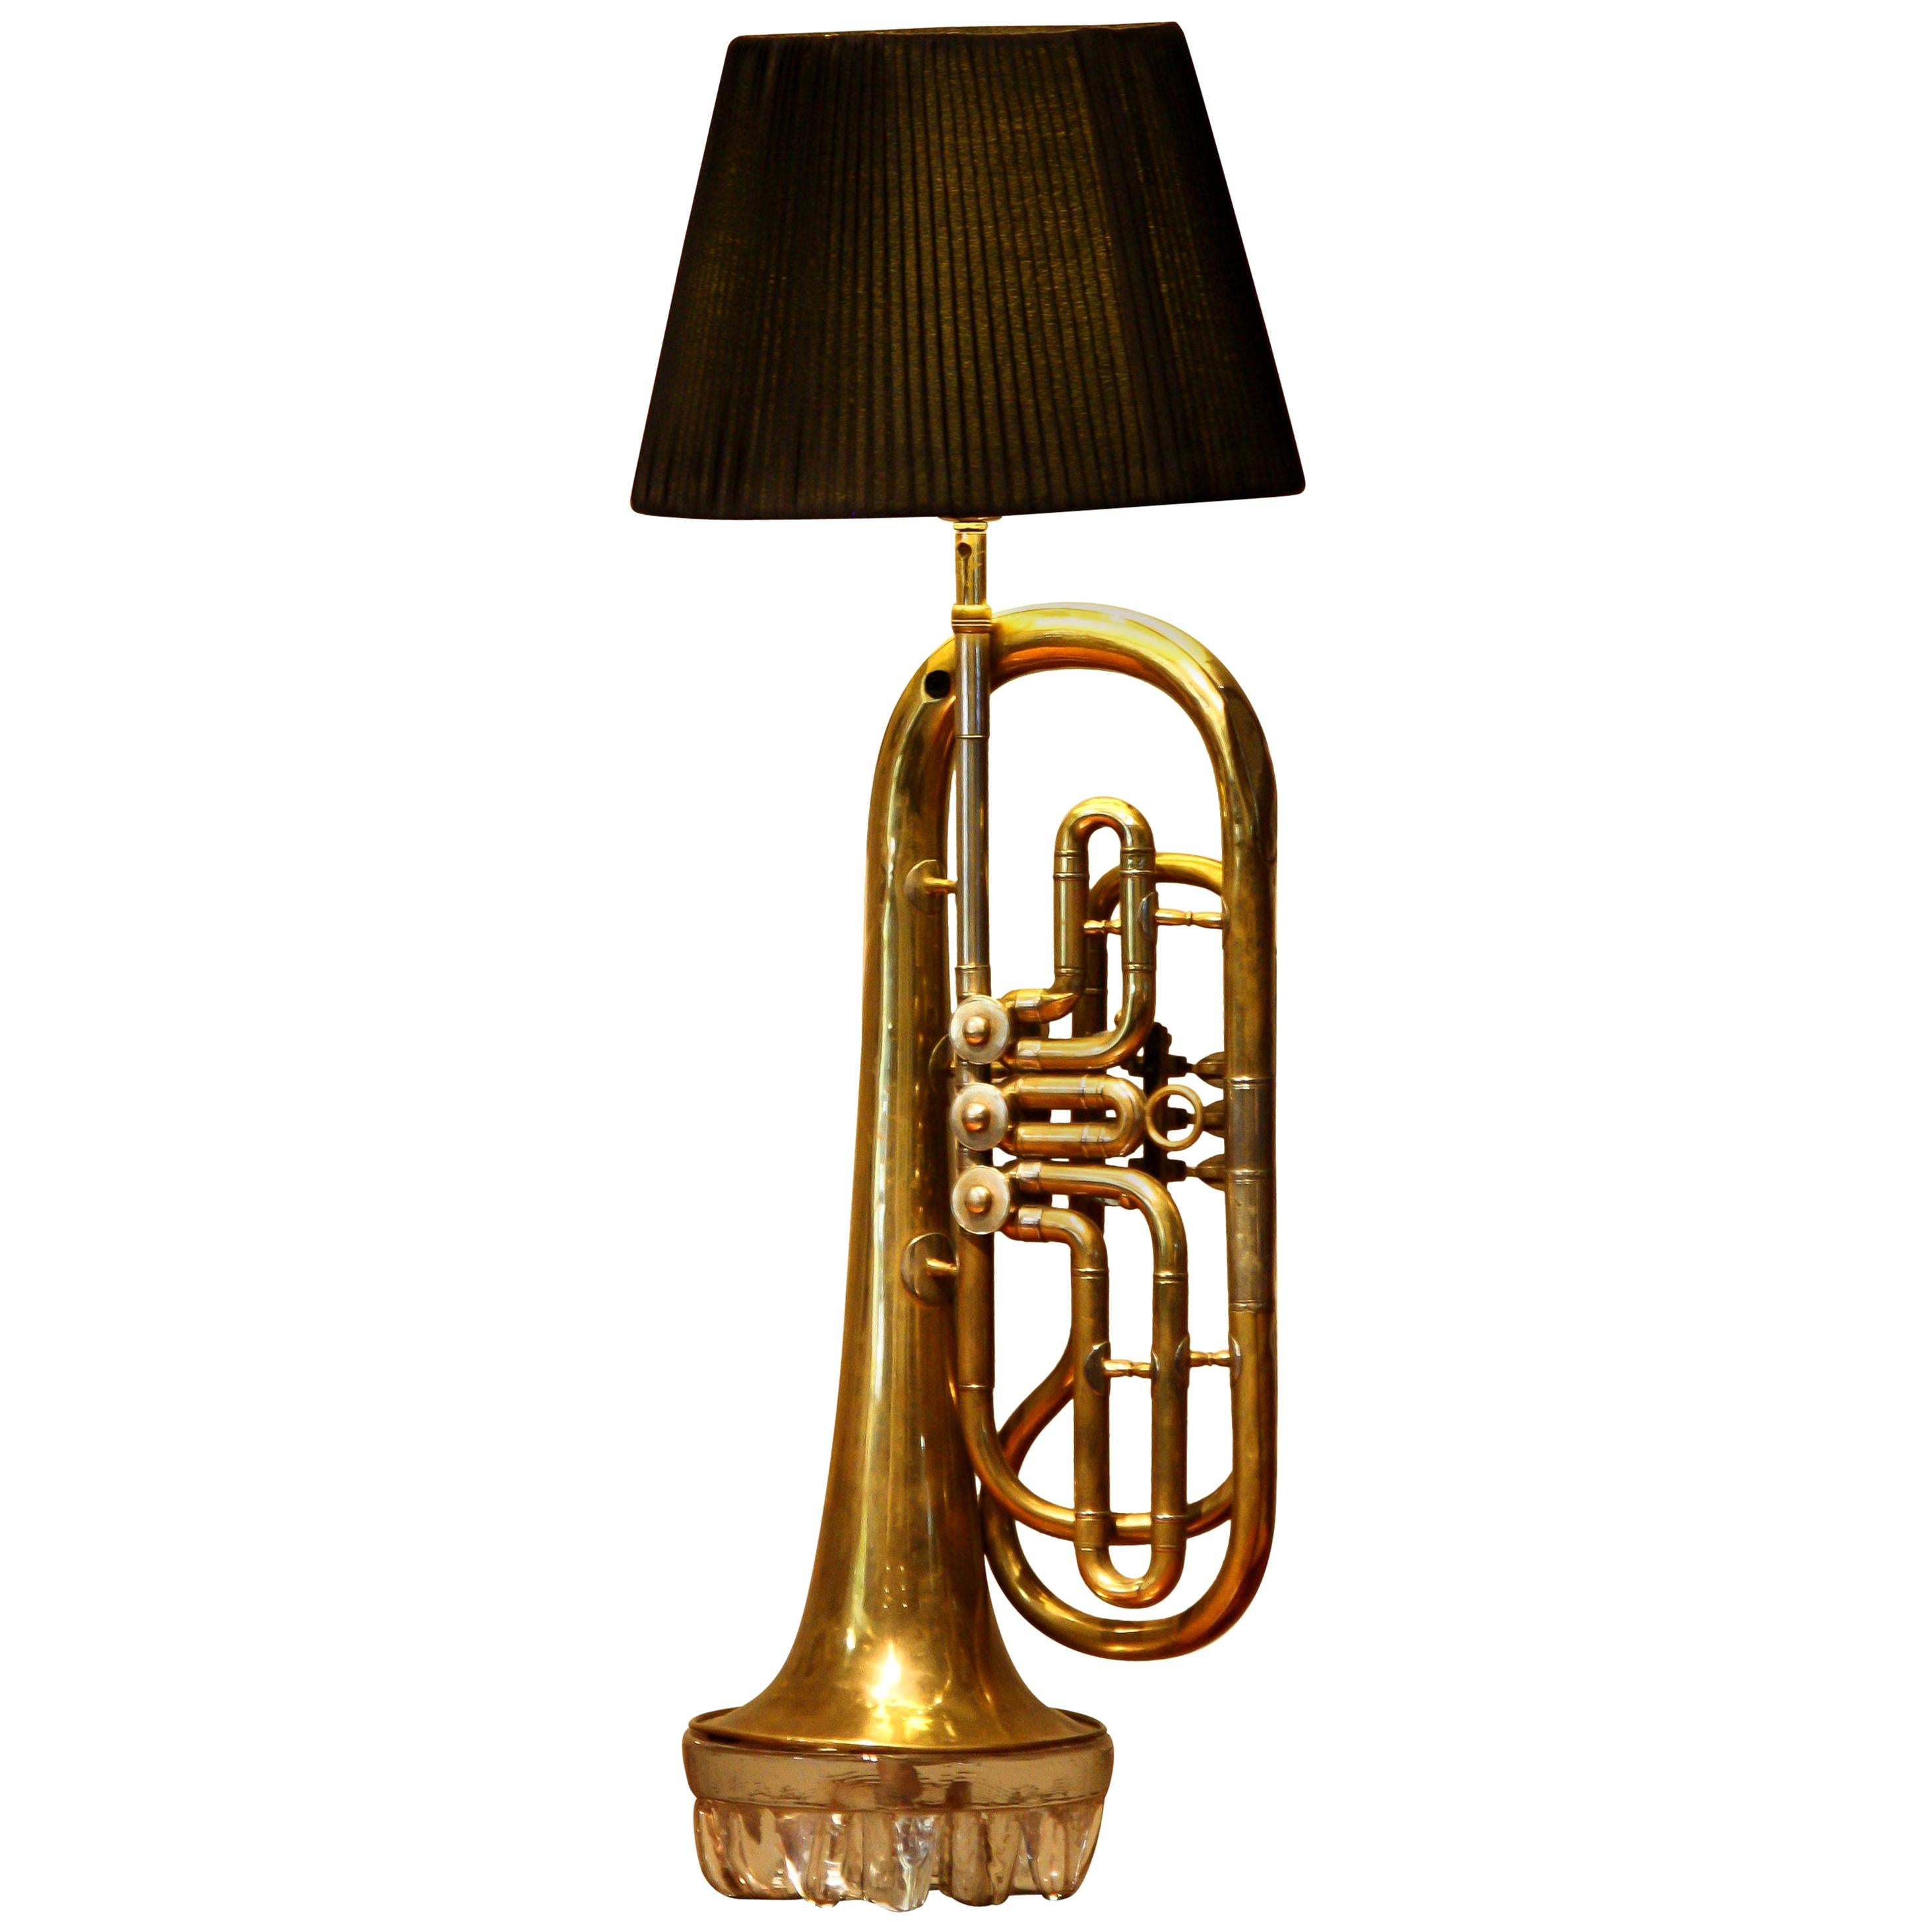 Decorative, table lamp made of an American brass cornet flaps trumpet from the 1920s.
Art Deco / Jugendstil.
Technically 100%. One E26 / E27 bulb.
The dimensions are: H.72 cm, 28 inch, W 27 cm, 11 inch.